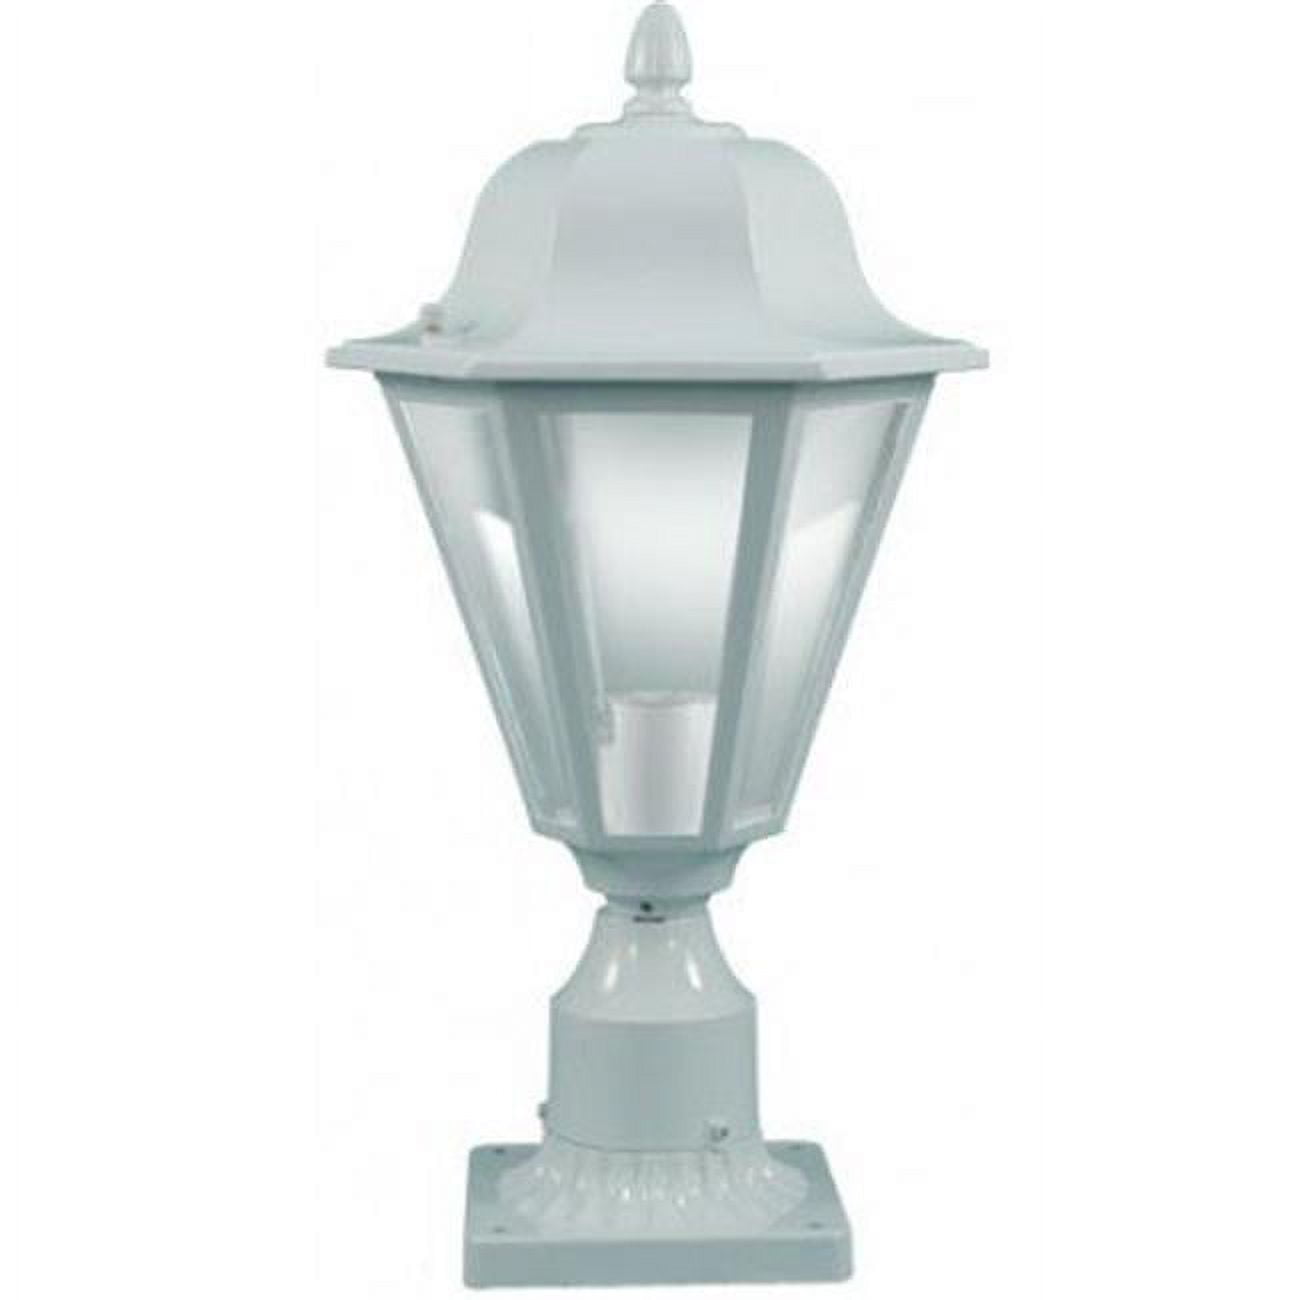 Picture of Dabmar Lighting GM131-W-FROST 13W & 120V S13-GU24 Daniella Post Top Light Fixture with Frosted Glass - White